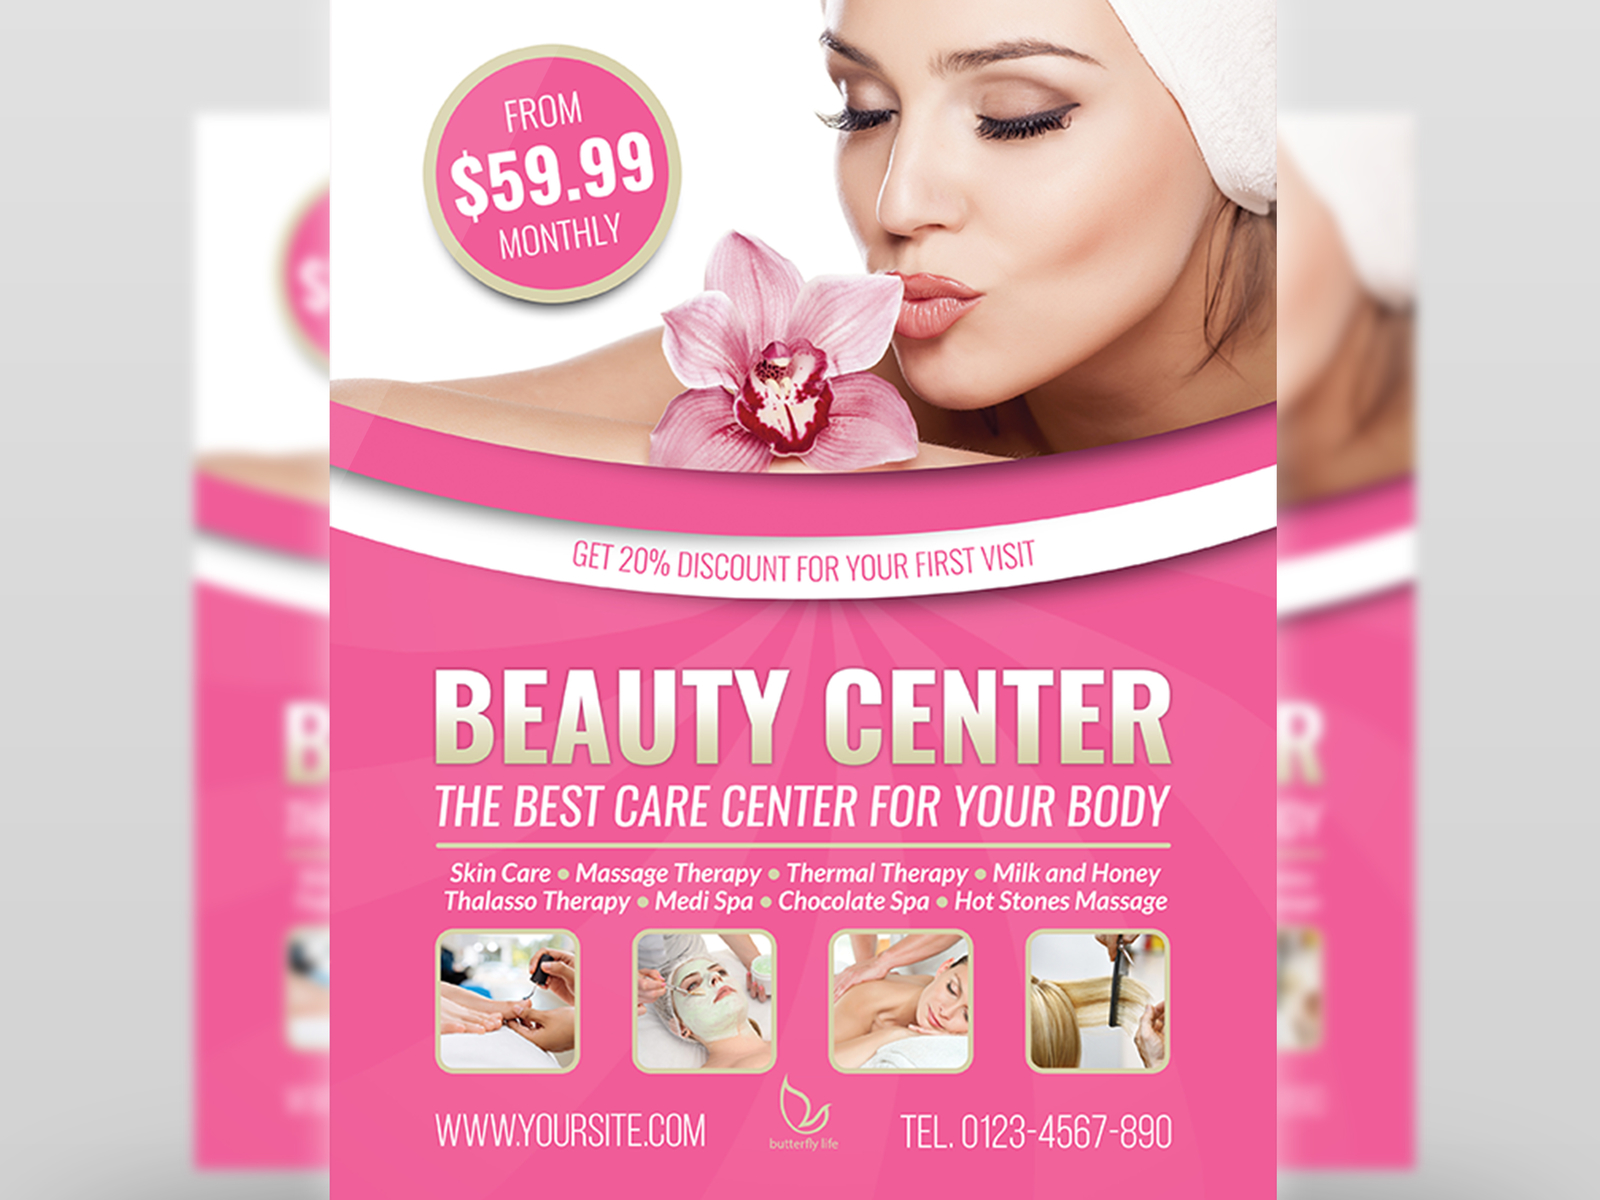 Beauty Center Flyer Template by OWPictures on Dribbble